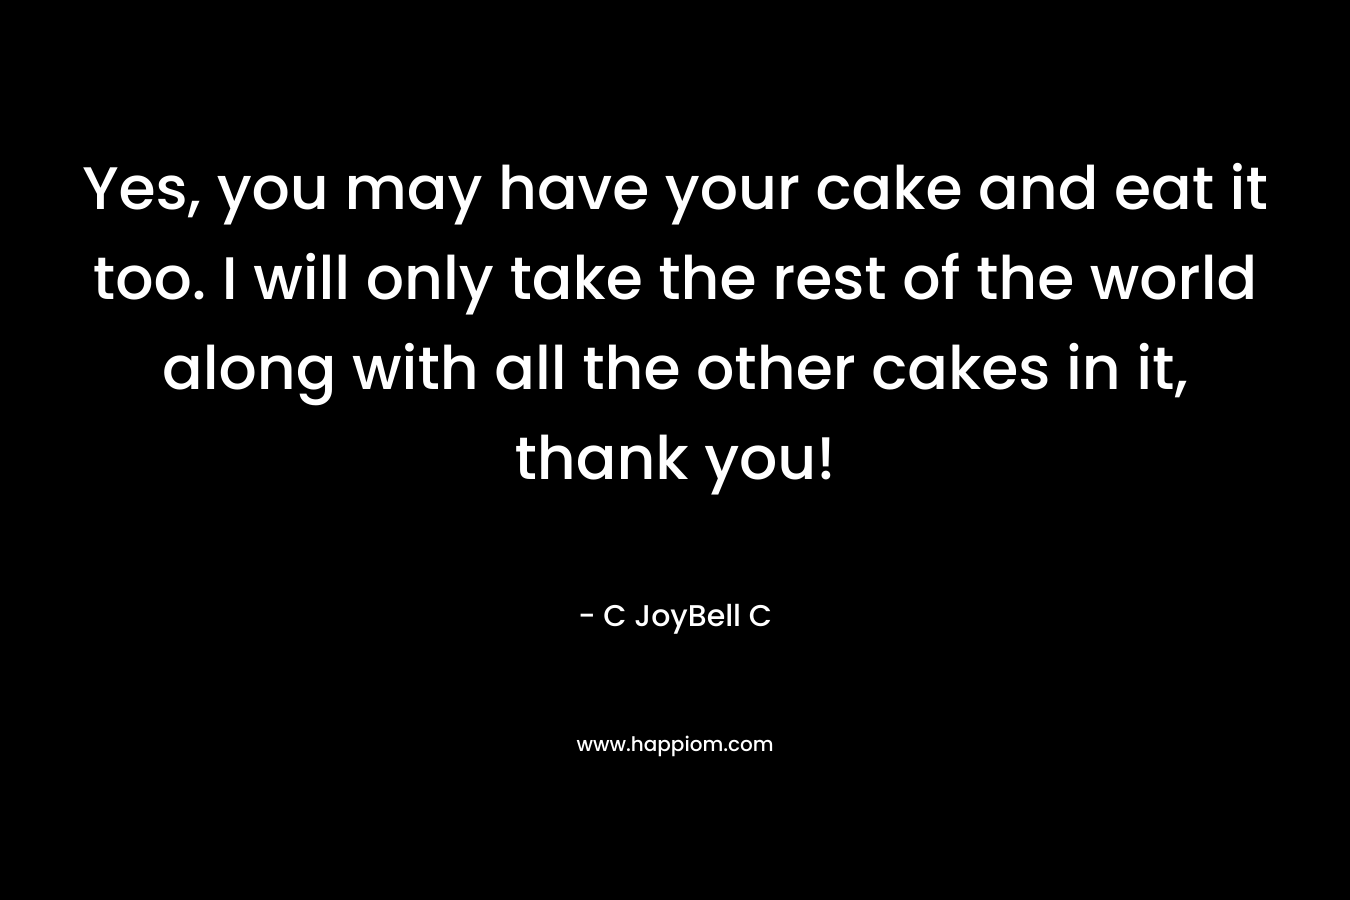 Yes, you may have your cake and eat it too. I will only take the rest of the world along with all the other cakes in it, thank you! – C JoyBell C